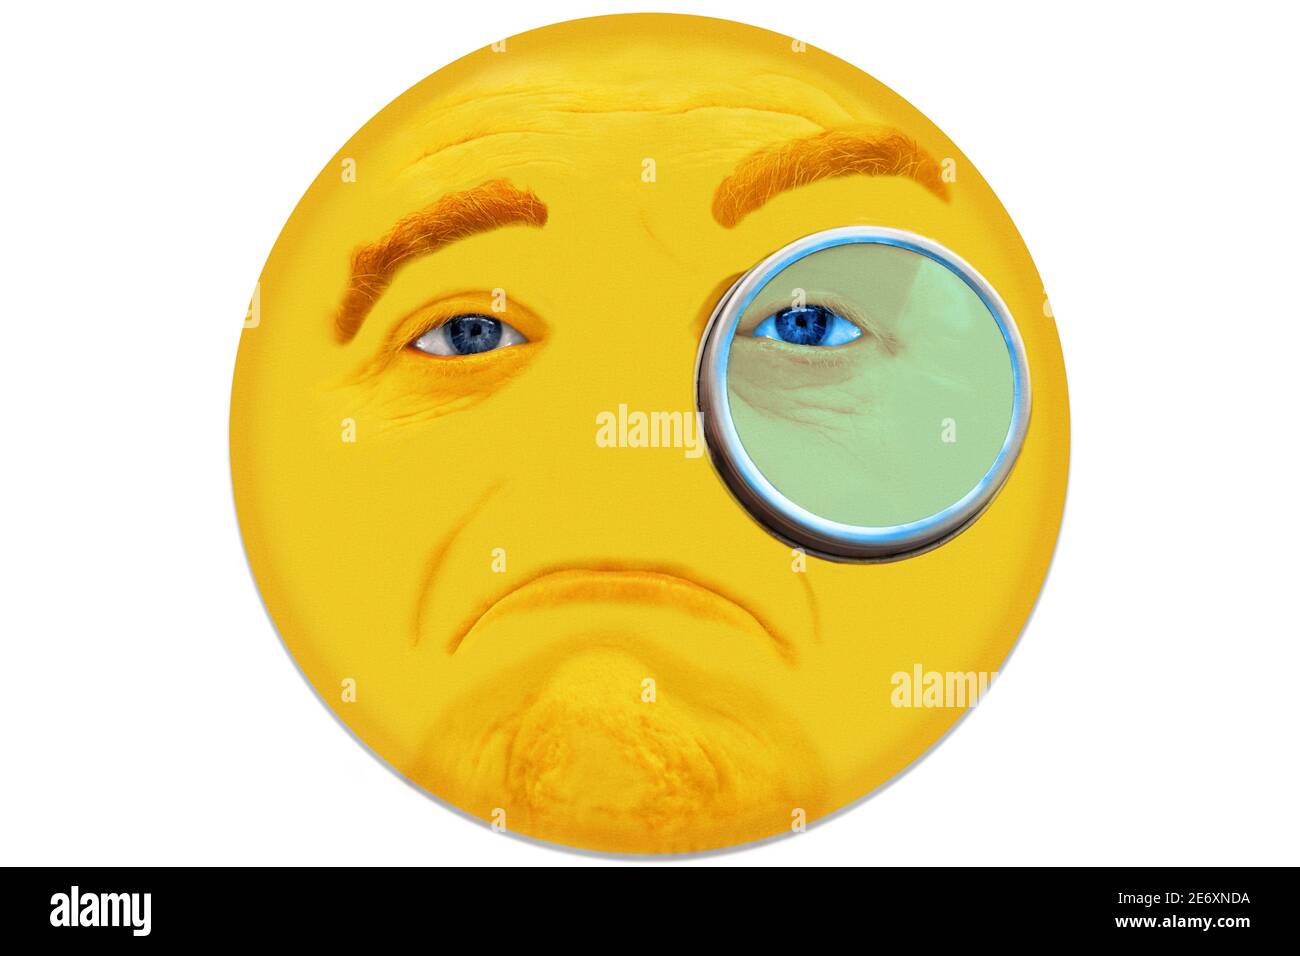 A yellow face of a man shows emotion skepticism, doubt, mistrust. A monocle and a raised eyebrow symbolize a testing look. Stock Photo